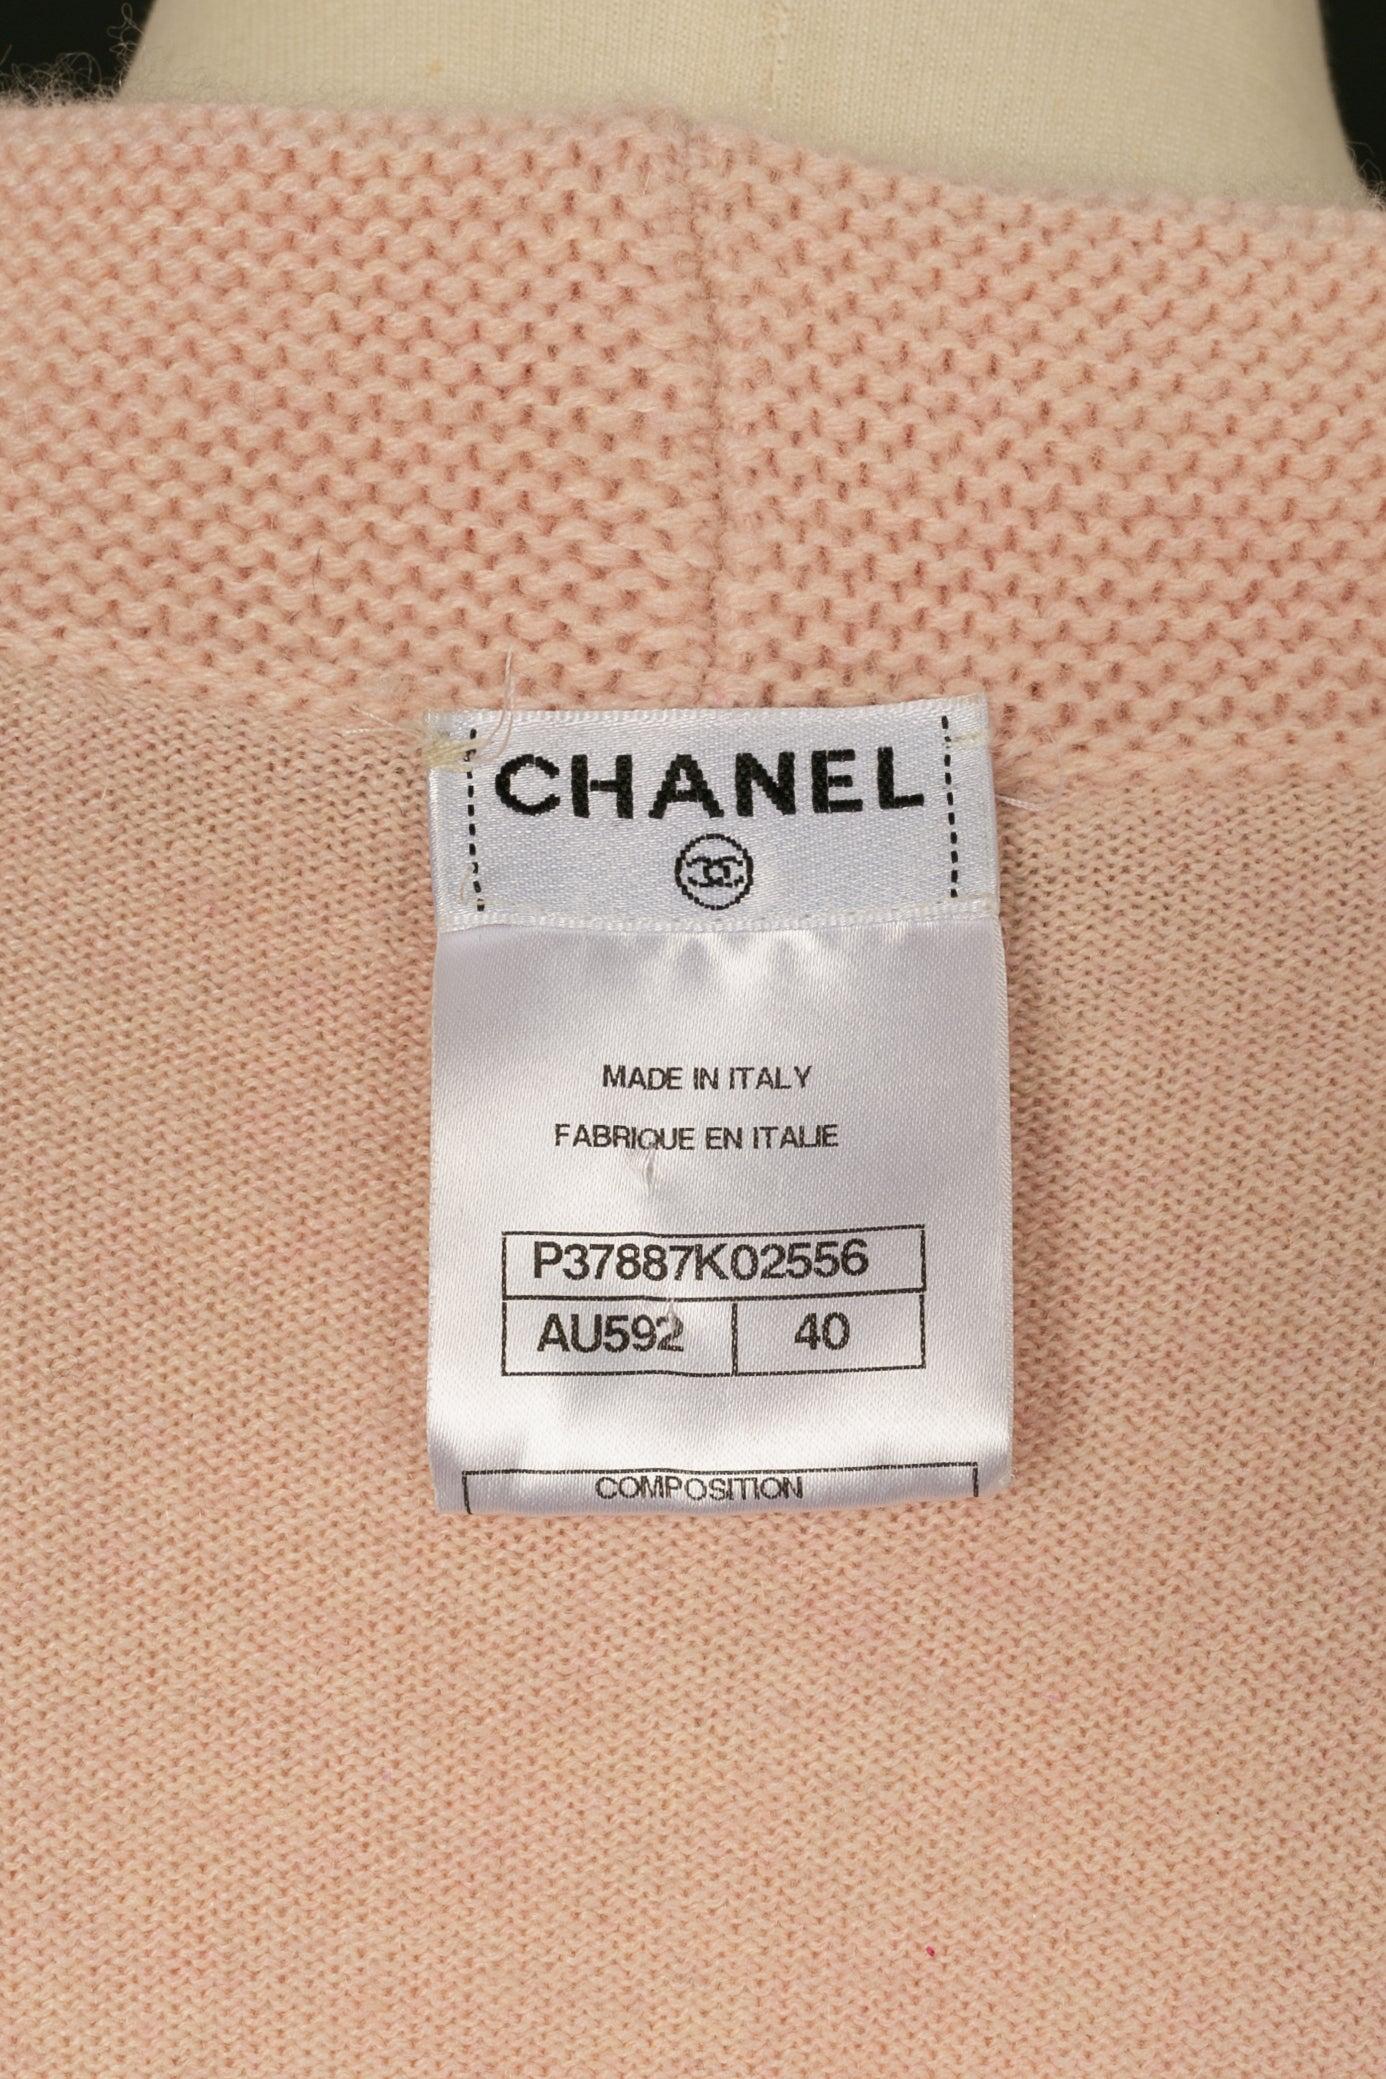 Chanel Cardigan in Pink Cashmere Enhanced with Ribbons, Pearls For Sale 5